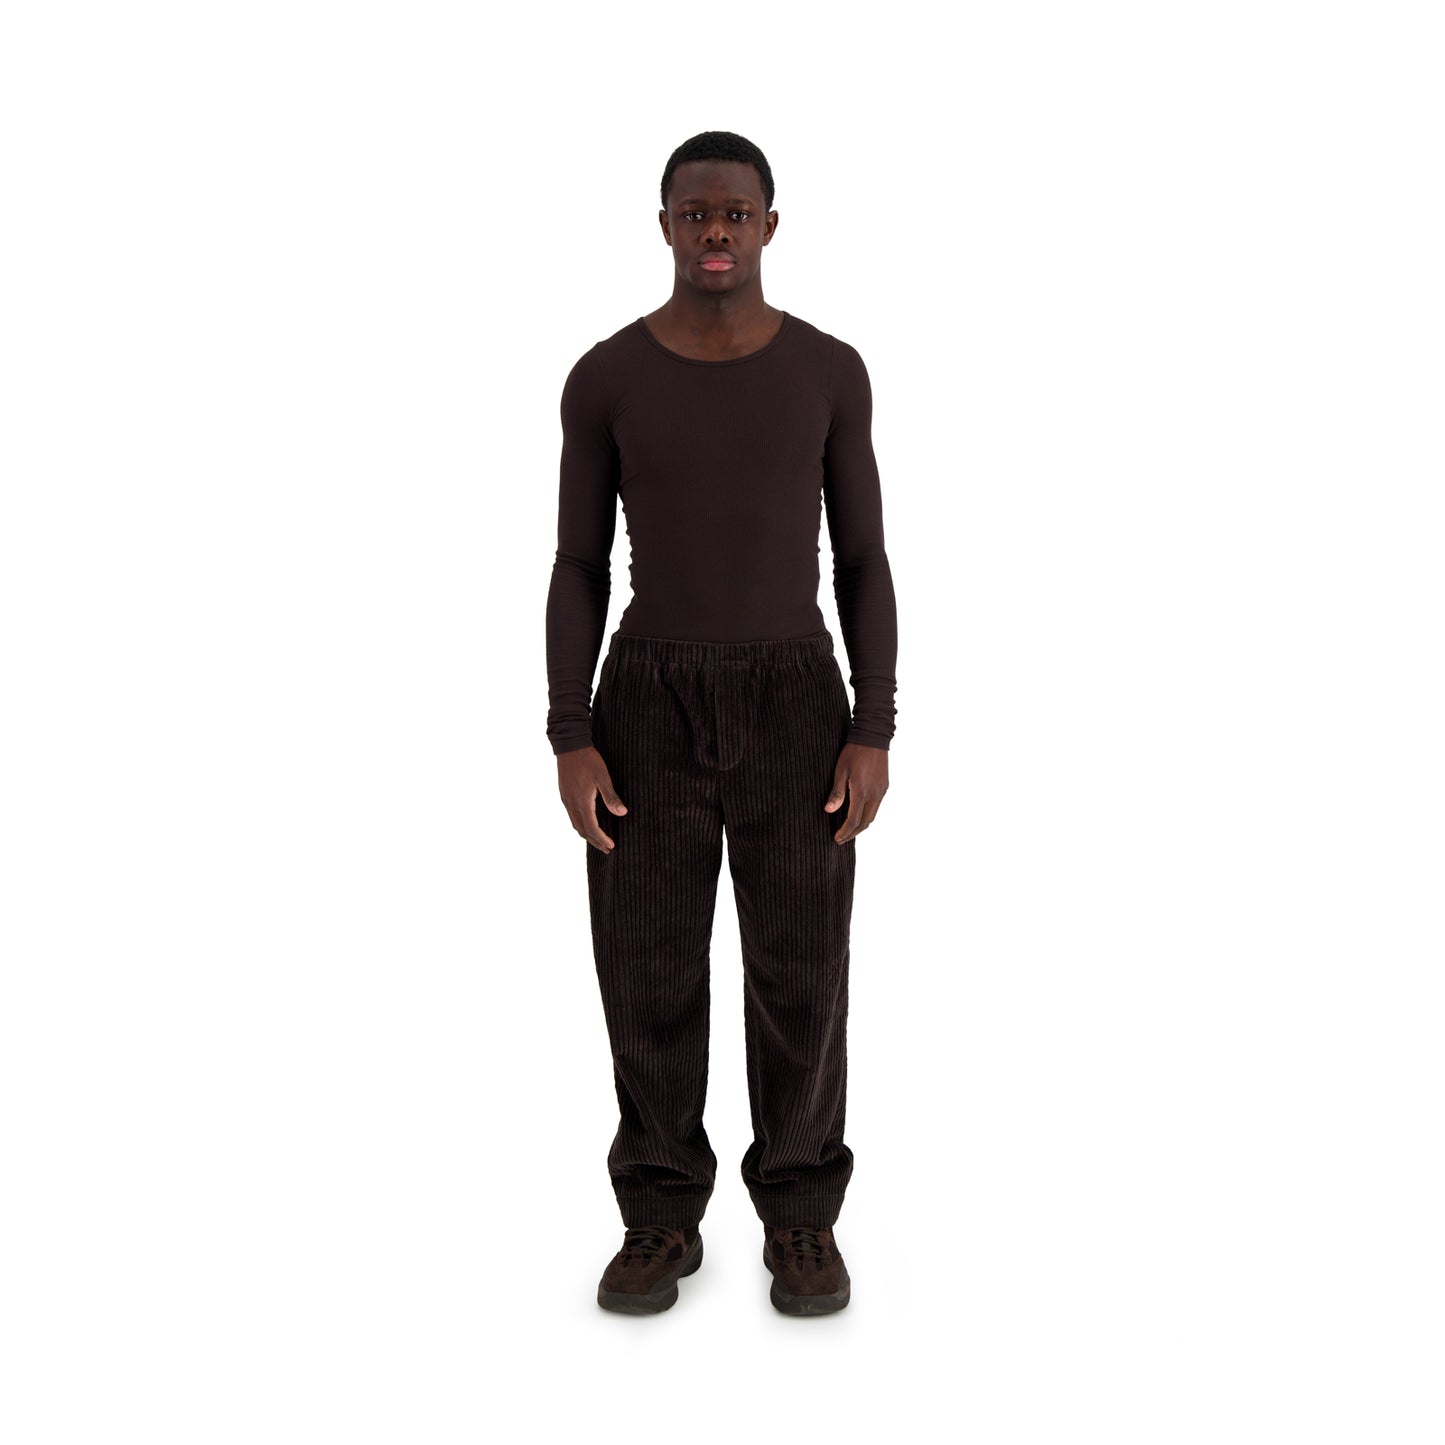 Ed Unlined Exaggerated Cotton Corduroy Drawstring Trousers Dark Chocolate Brown